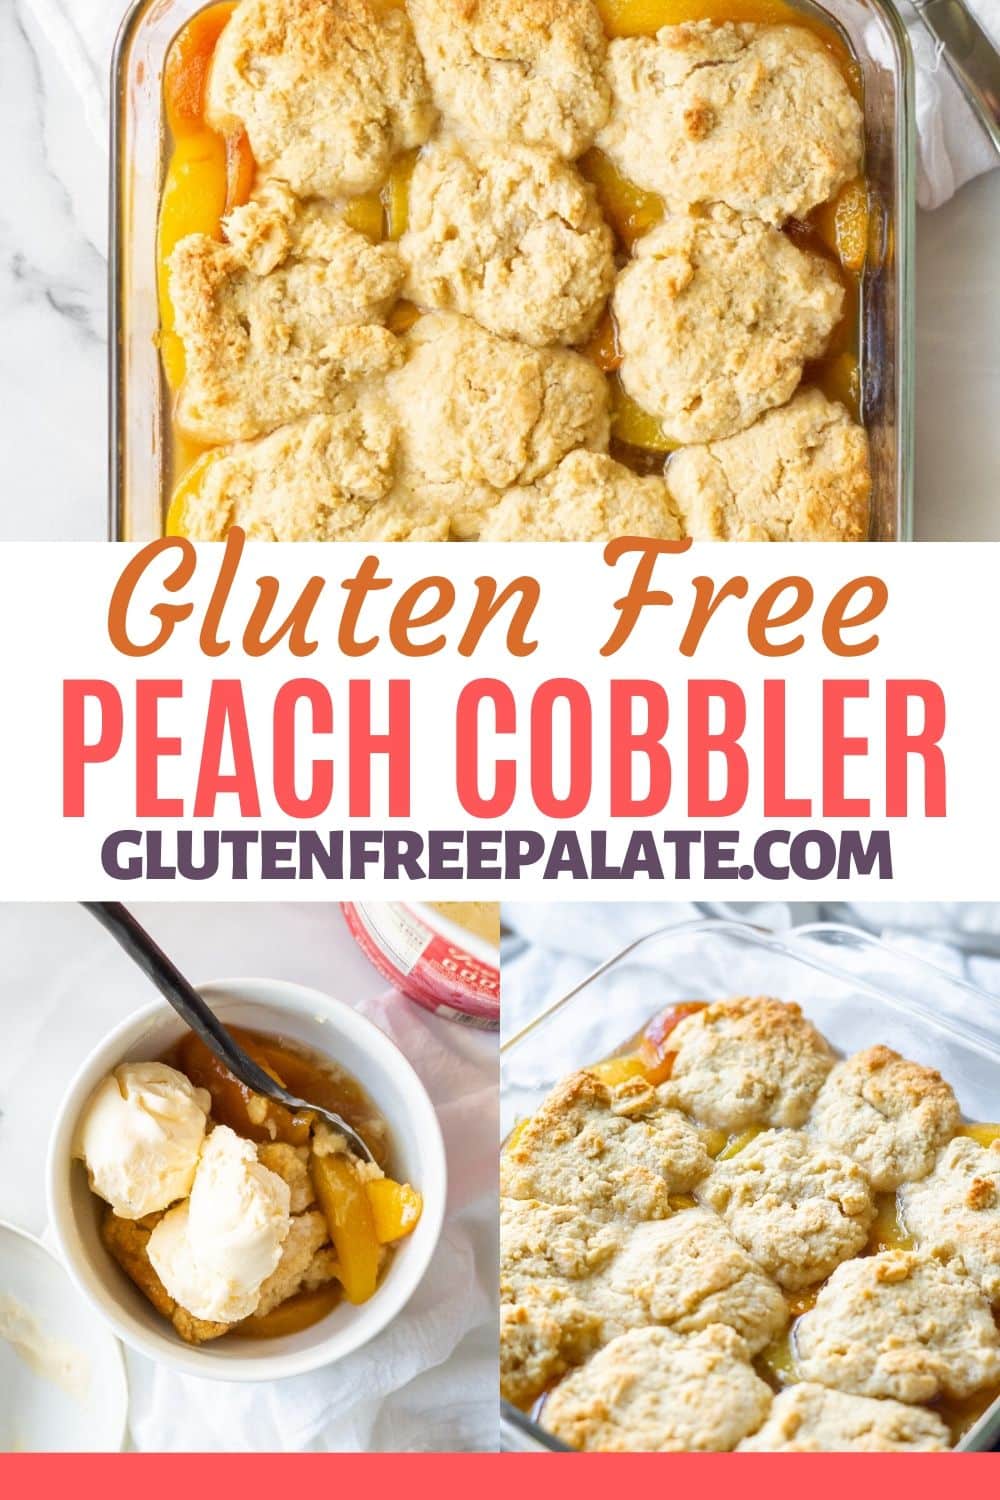 peach cobbler pinterest pin with images of peach cobbler